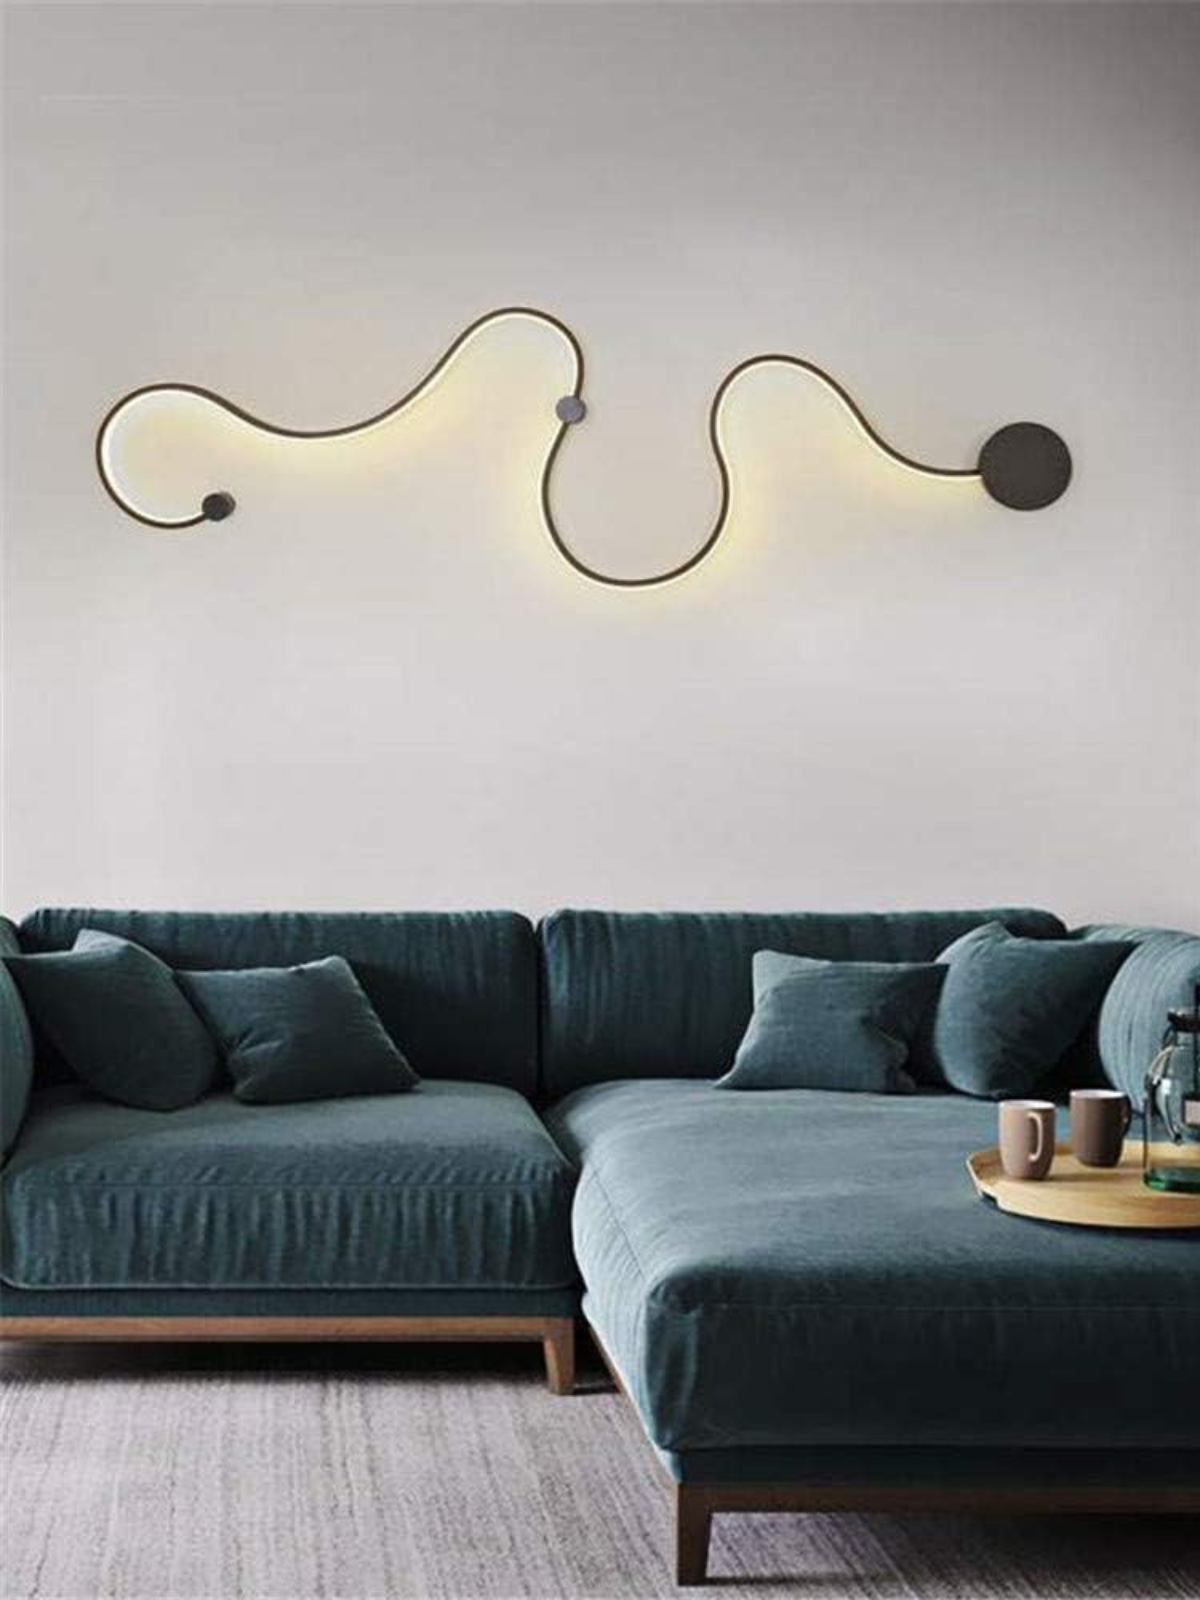 Aluminum Snake Shaped Wall Lamp Creative Wall Sconce Contemporary Special Home Decoration 50.40" Minimalist Wall Light for Living Room, Bedroom, Kitchen 24W in Black Warm Light